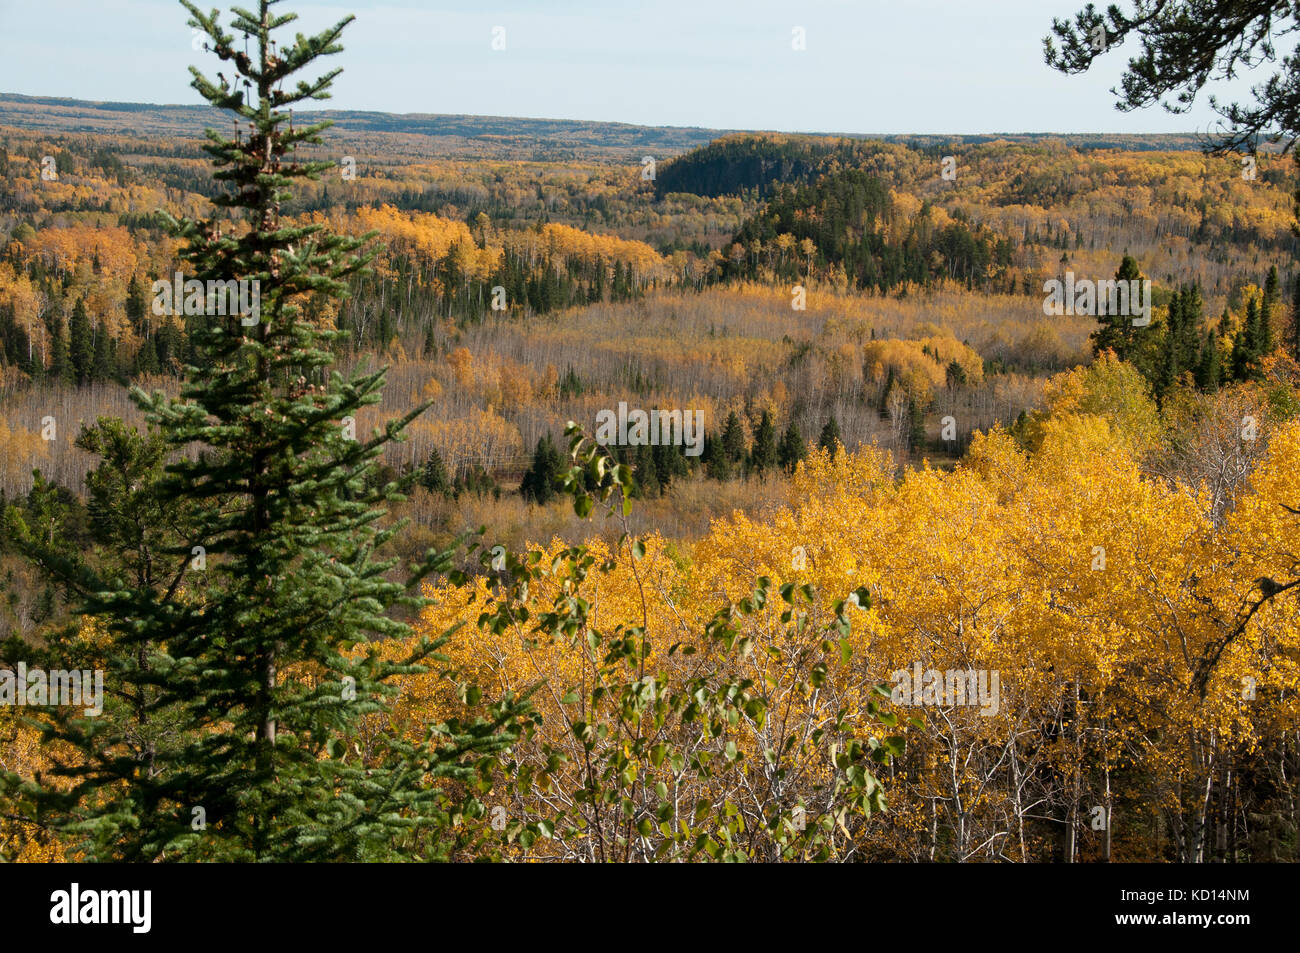 Scenic of autumn boreal forest with Quaking or Trembling Aspen (Populus tremuloides), near Thunder Bay, Ontario, Canada Stock Photo